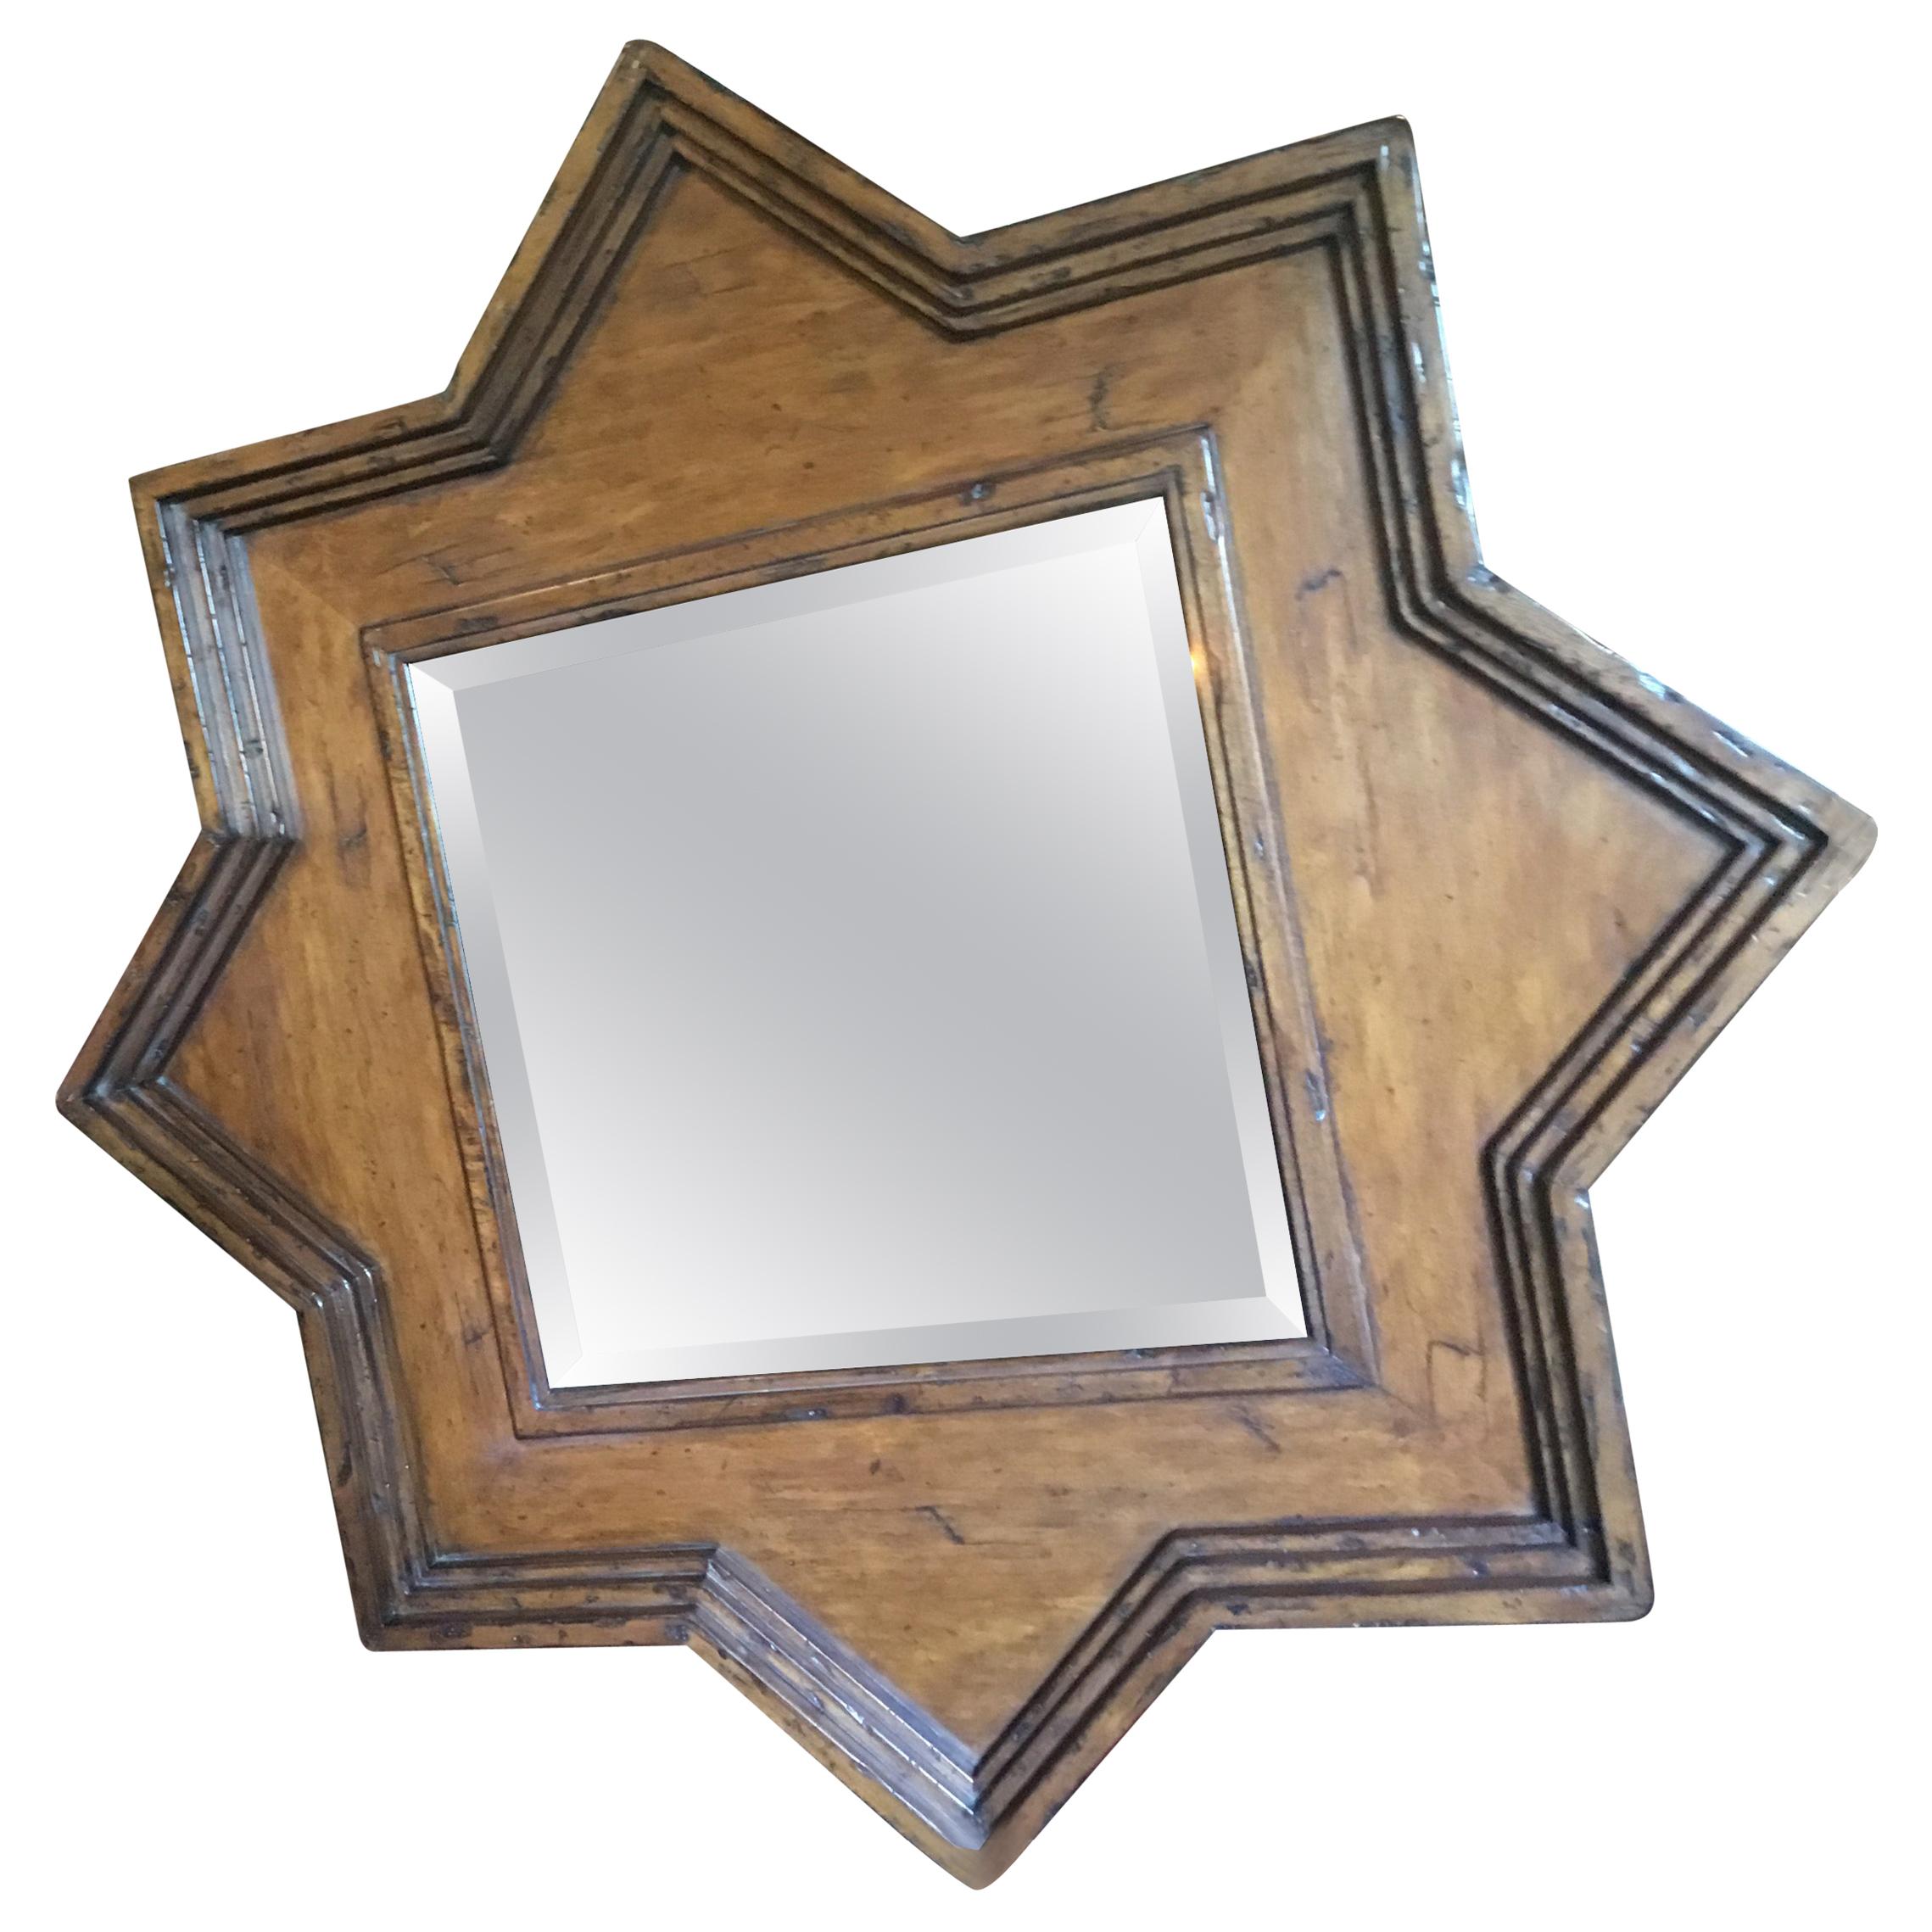 Rustic Star Shaped Rustic Frame with Square Shaped Beveled Mirror